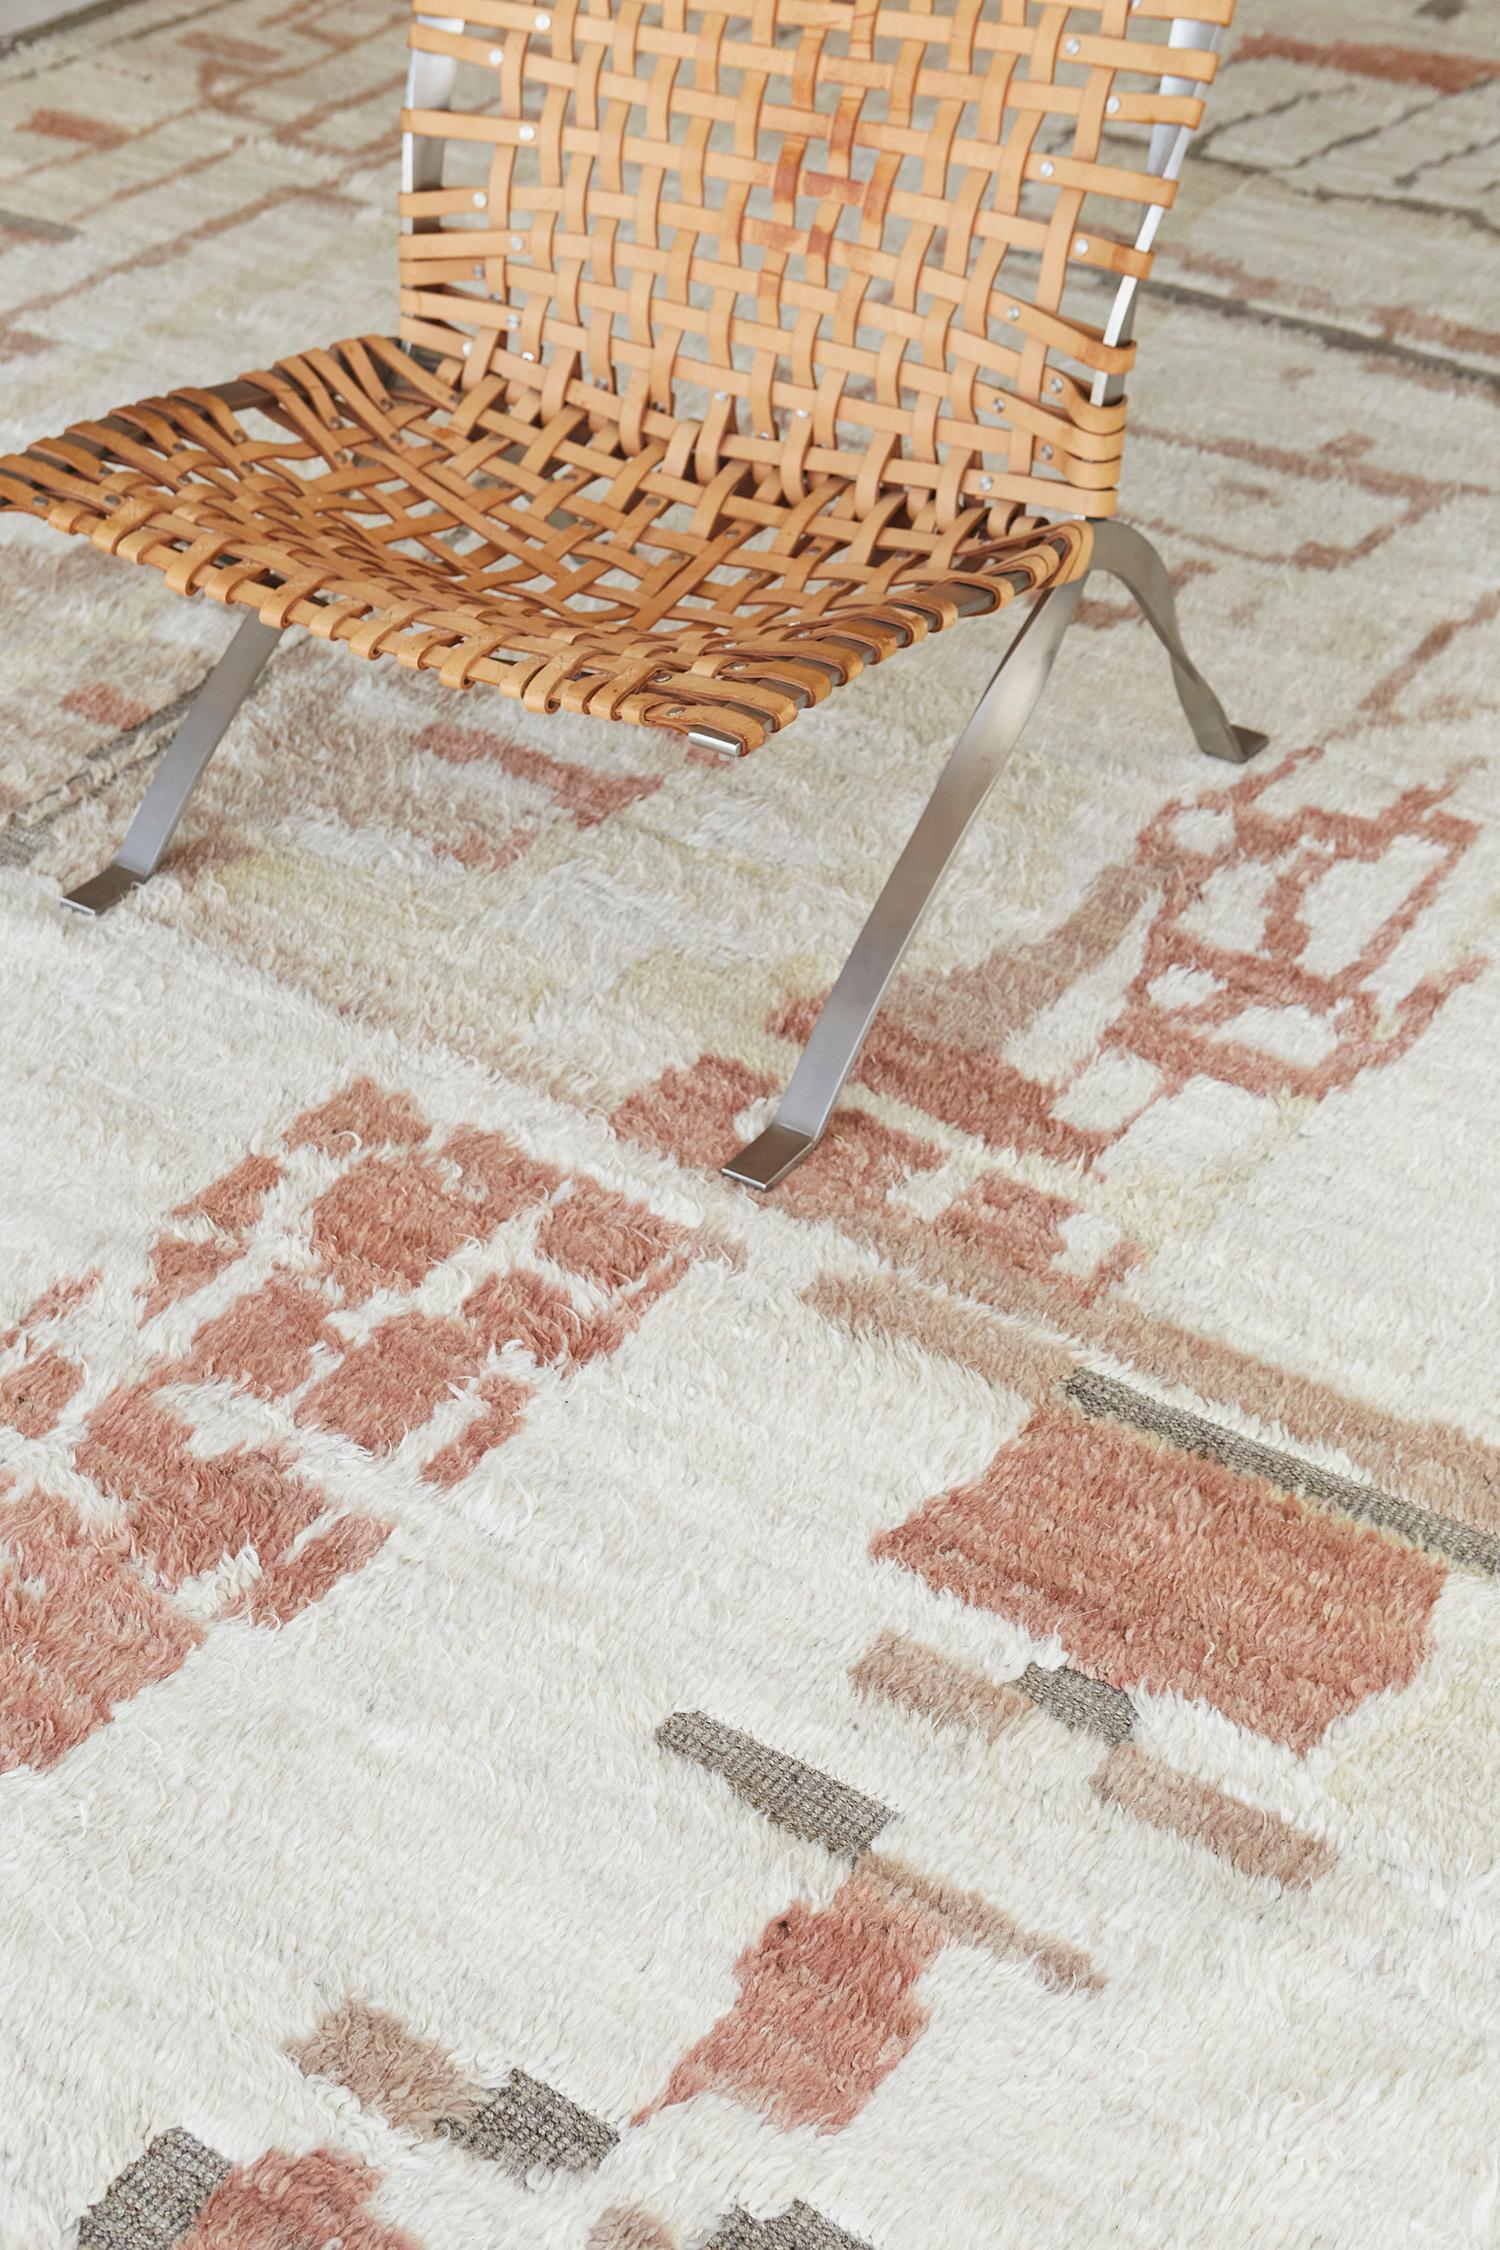 Meliska' is a beautifully textured rug with irregular motifs inspired by the Atlas Mountains of Morocco. Natural blush, cedar, and ginger surrounded by ivory shag work cohesively to make for a great contemporary interpretation for the modern design